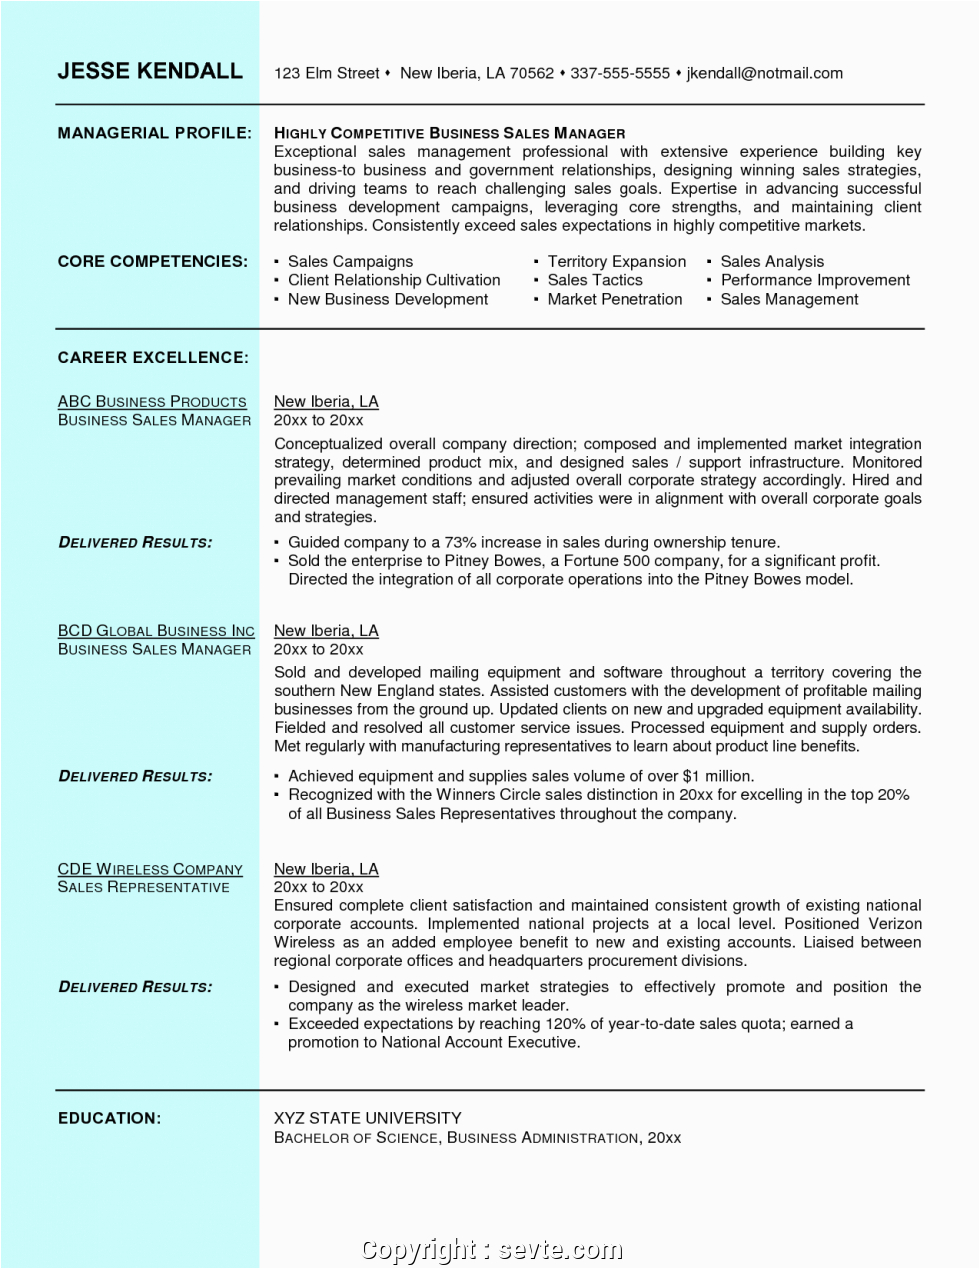 Best Resume Samples for Sales and Marketing Free Resume format for Sales and Marketing Manager Sample